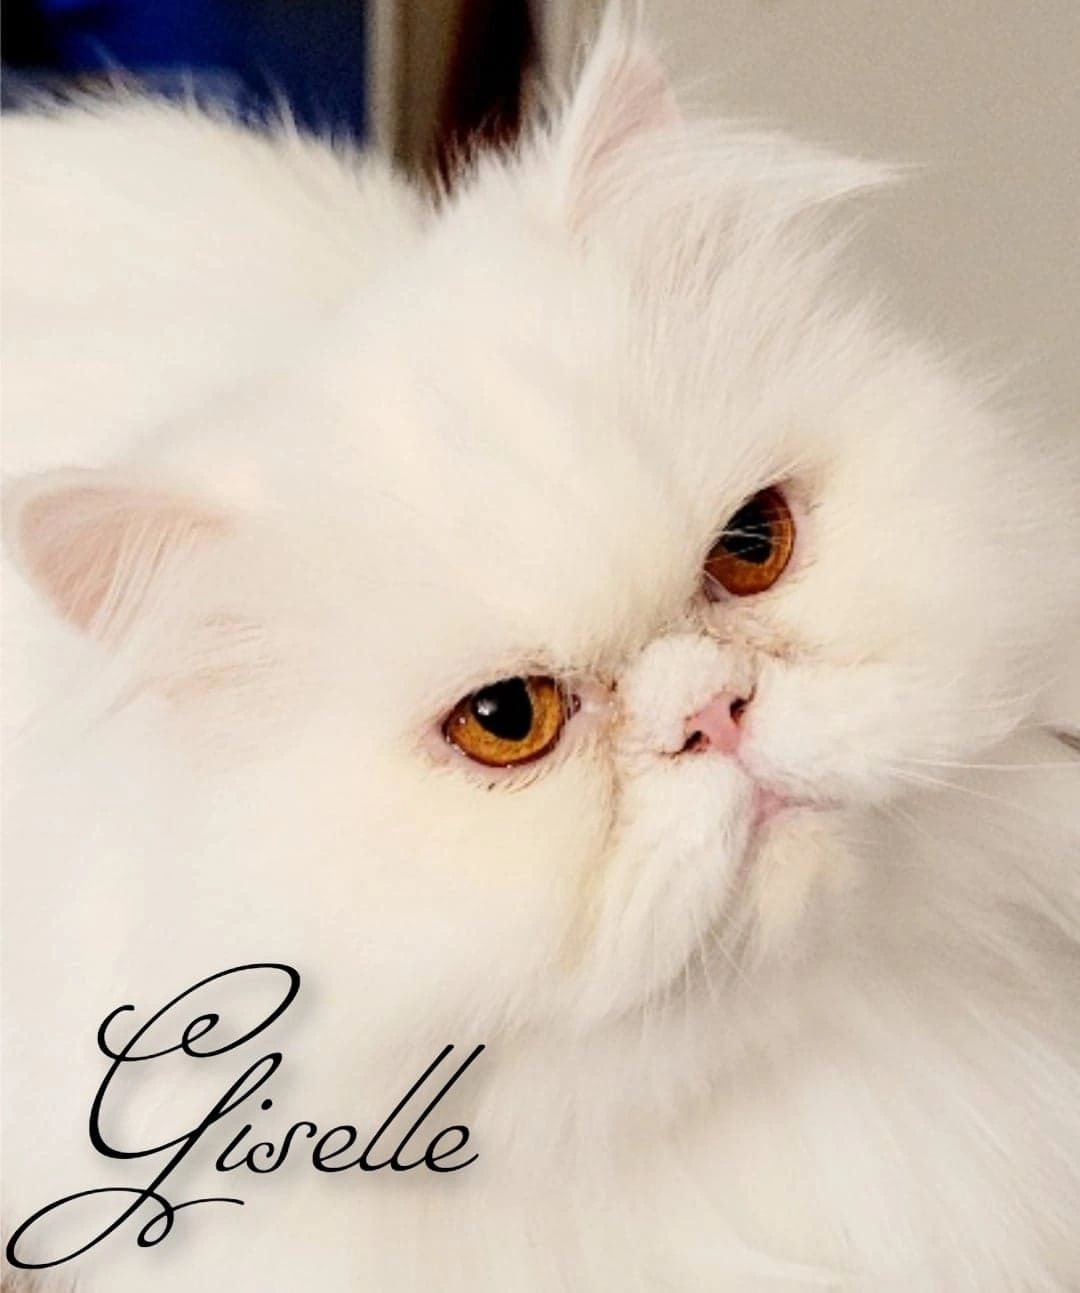 Giselle came to our cattery Oct. 6, 2018. She was a ball of white fluff with liquid gold eyes